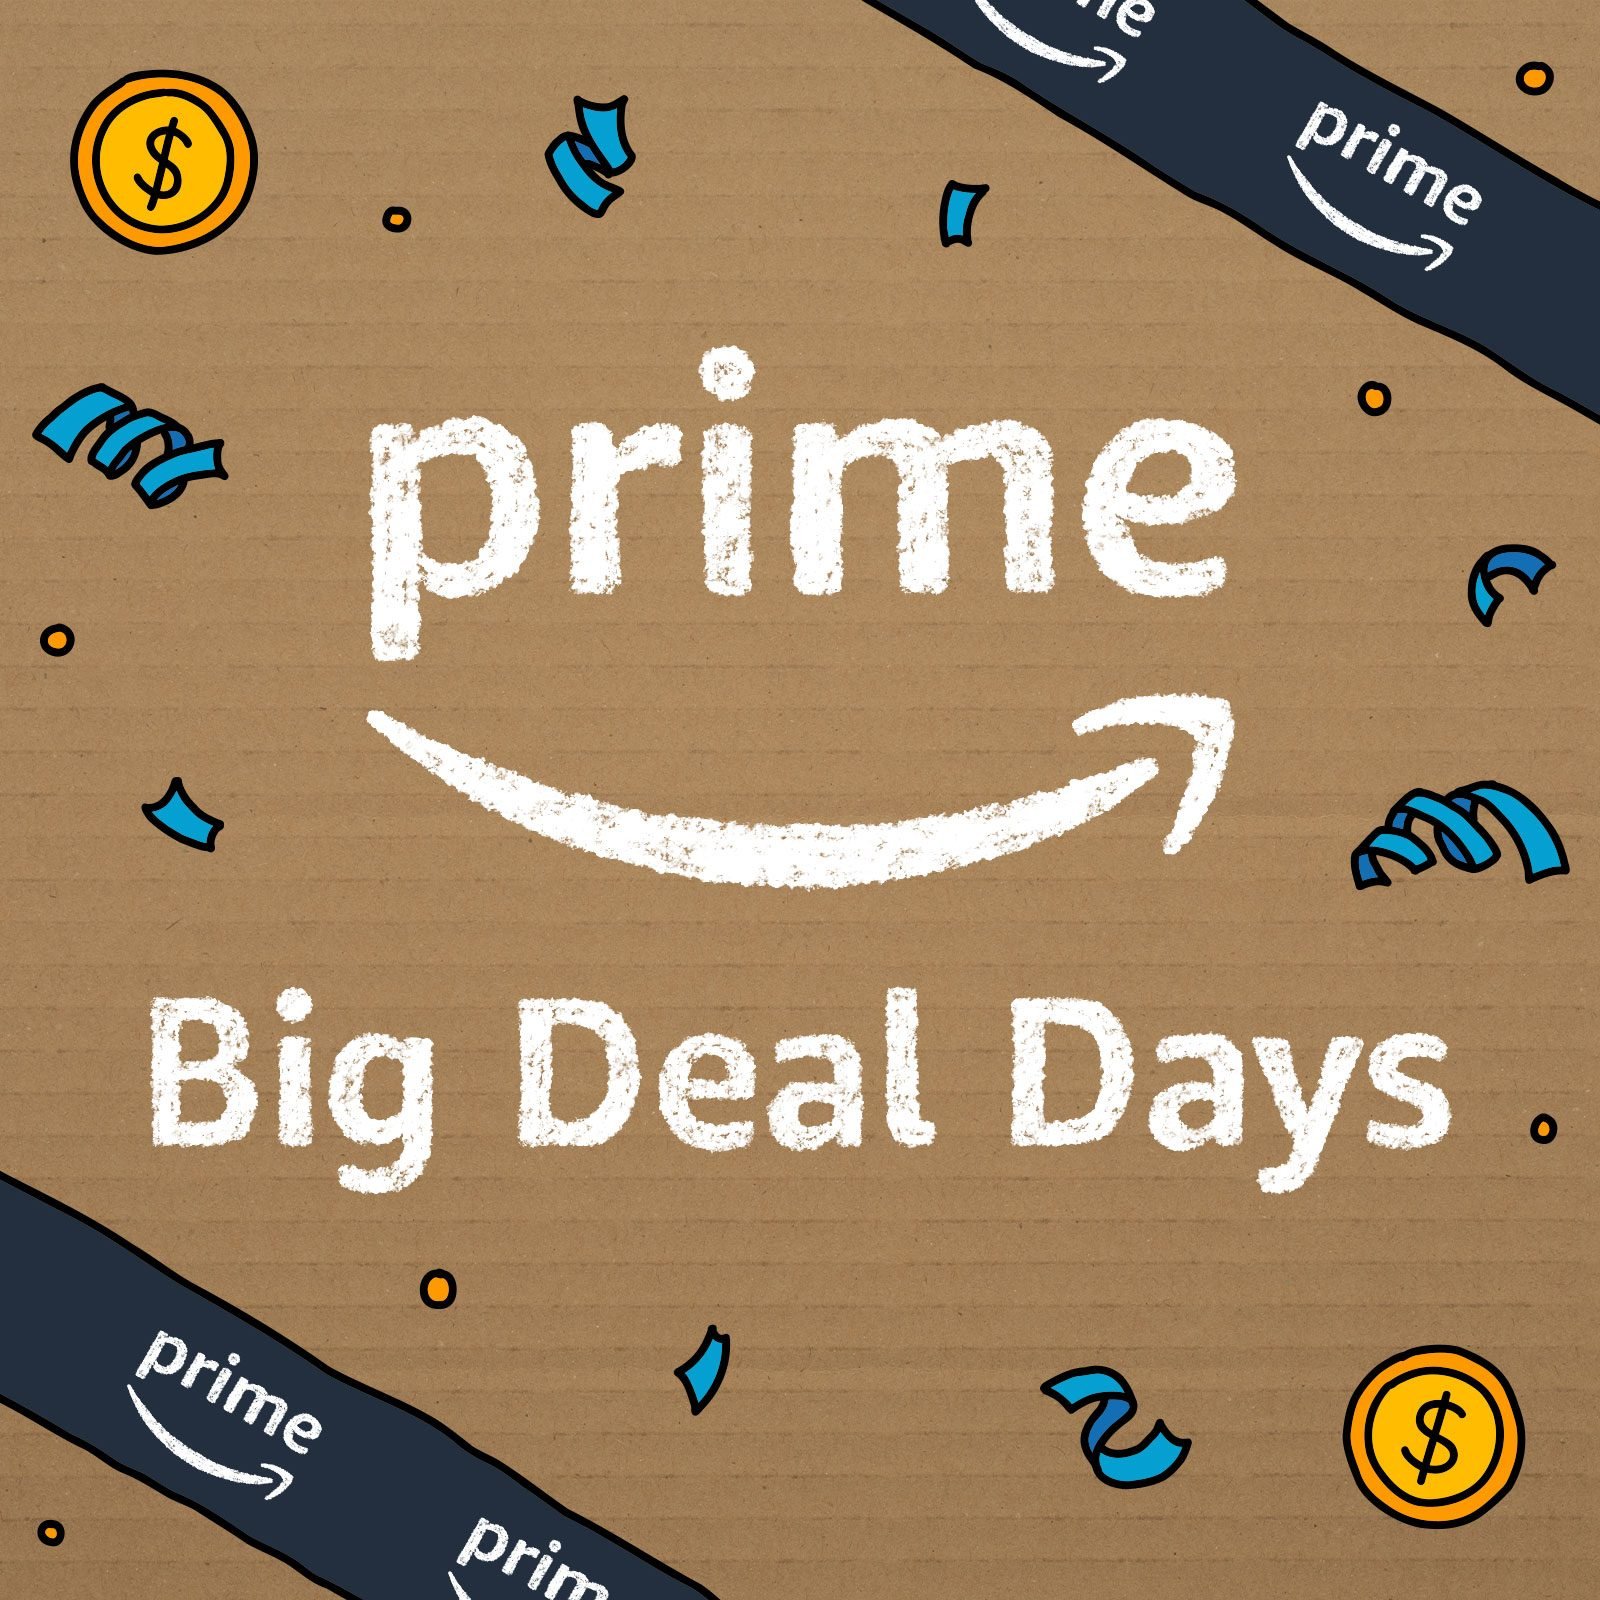 Prime Big Deal Days 2023: Best deals at the lowest prices